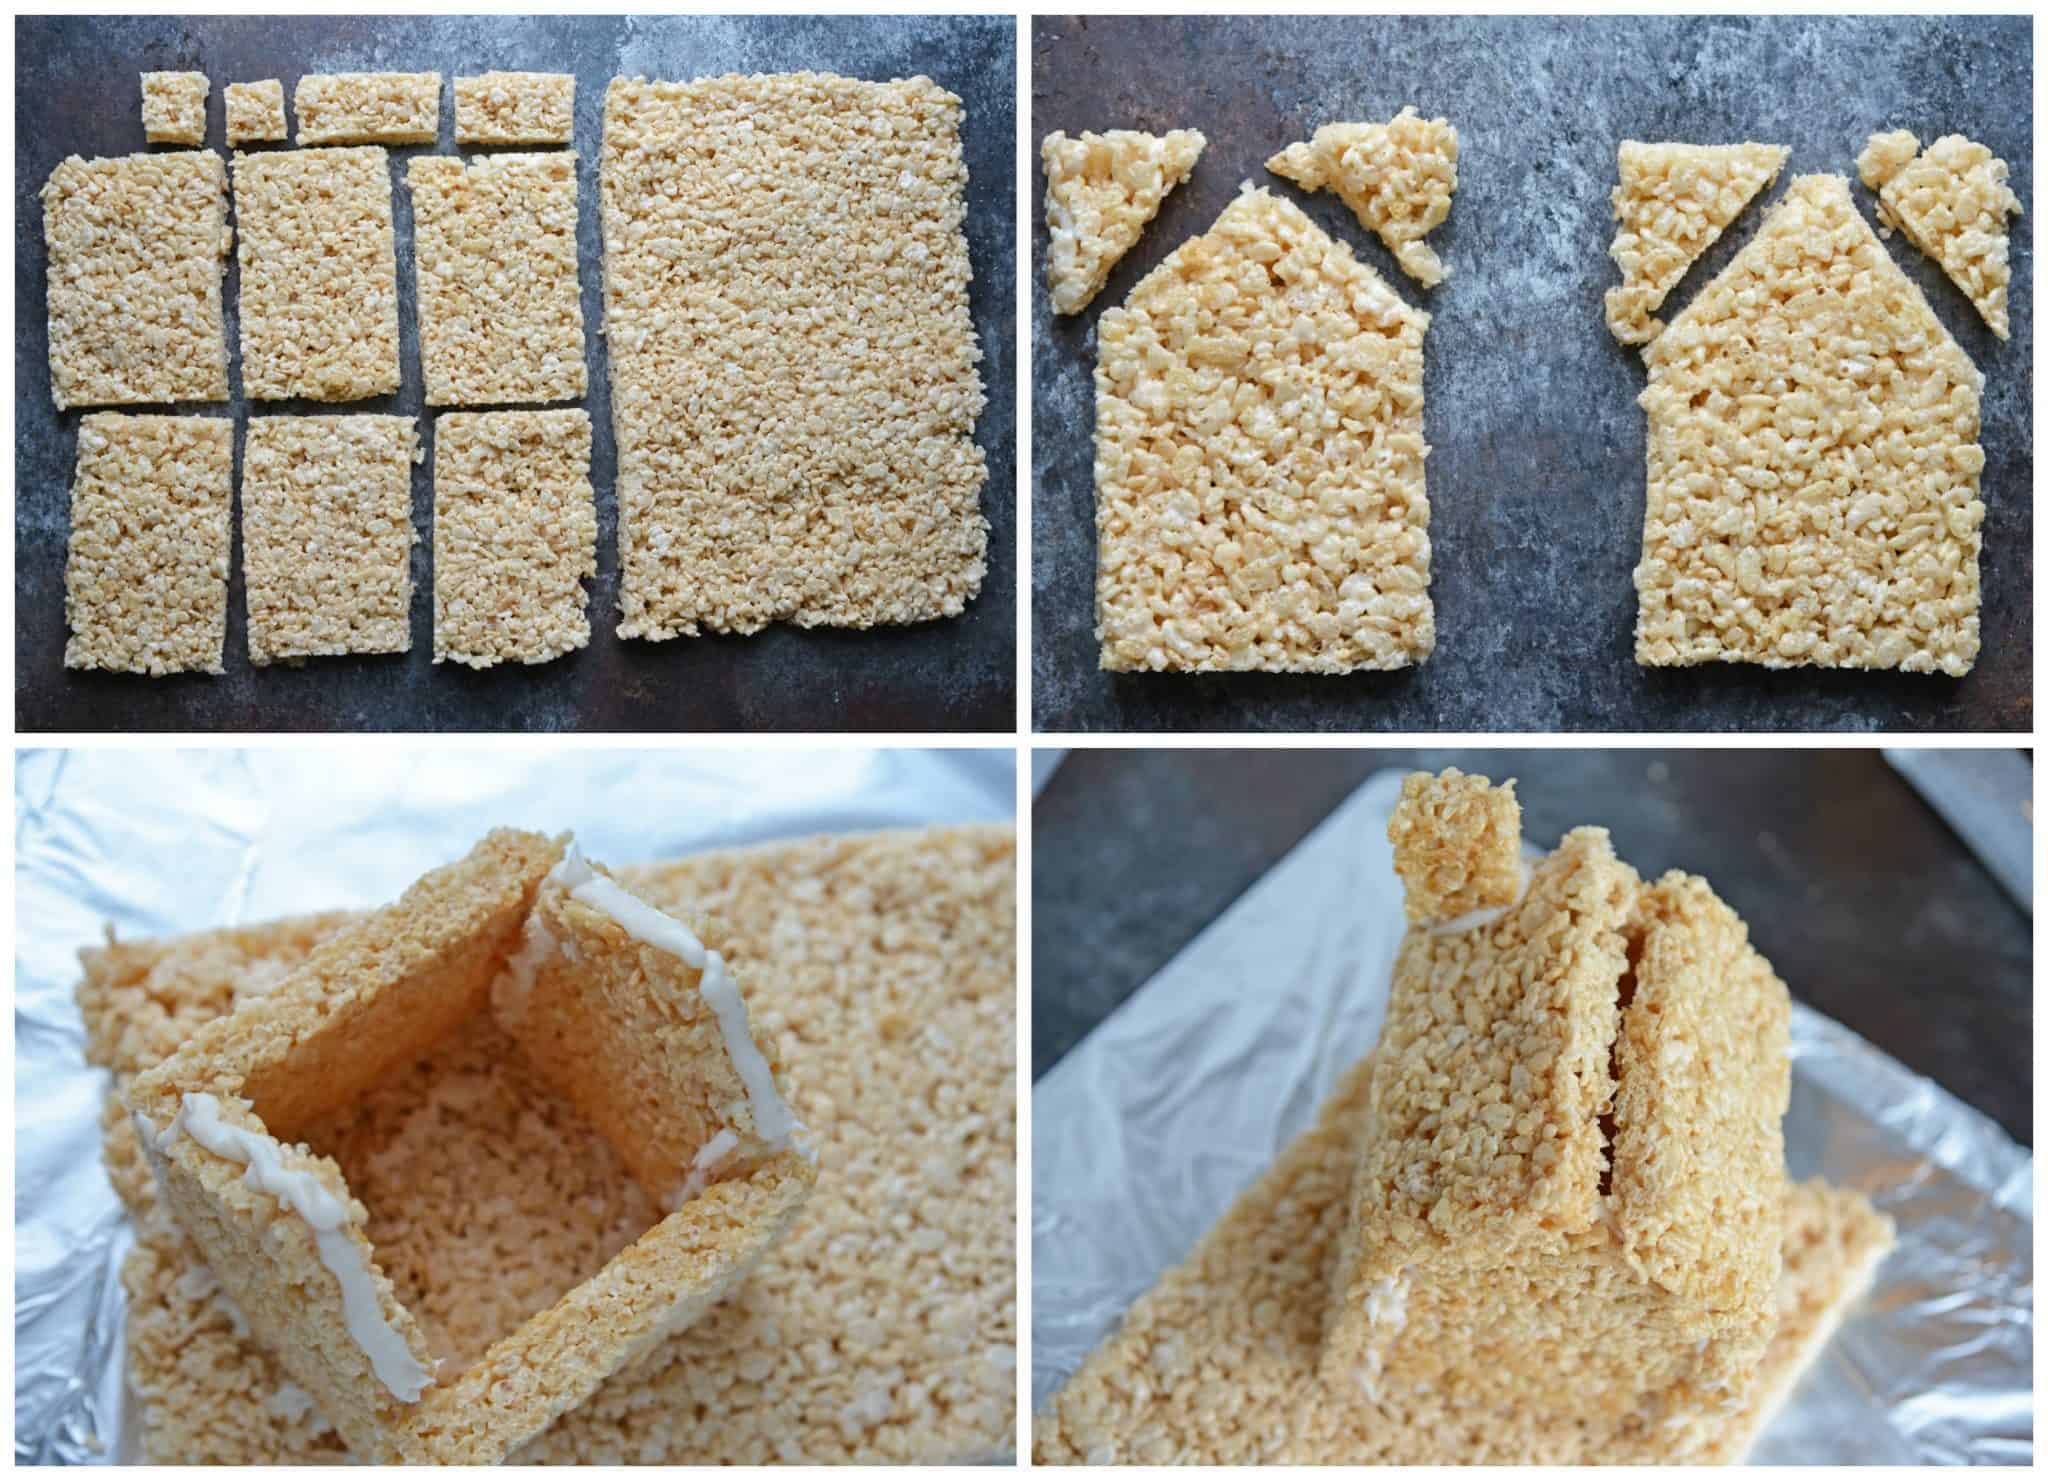 With this Rice Krispie Treat house template, you can make an adorable haunted house to display and then eat. Similar to a gingerbread house, this is part Halloween craft and party Halloween dessert. Fun and easy! #hauntedhouse #halloweendesserts www.savoryexperiments.com